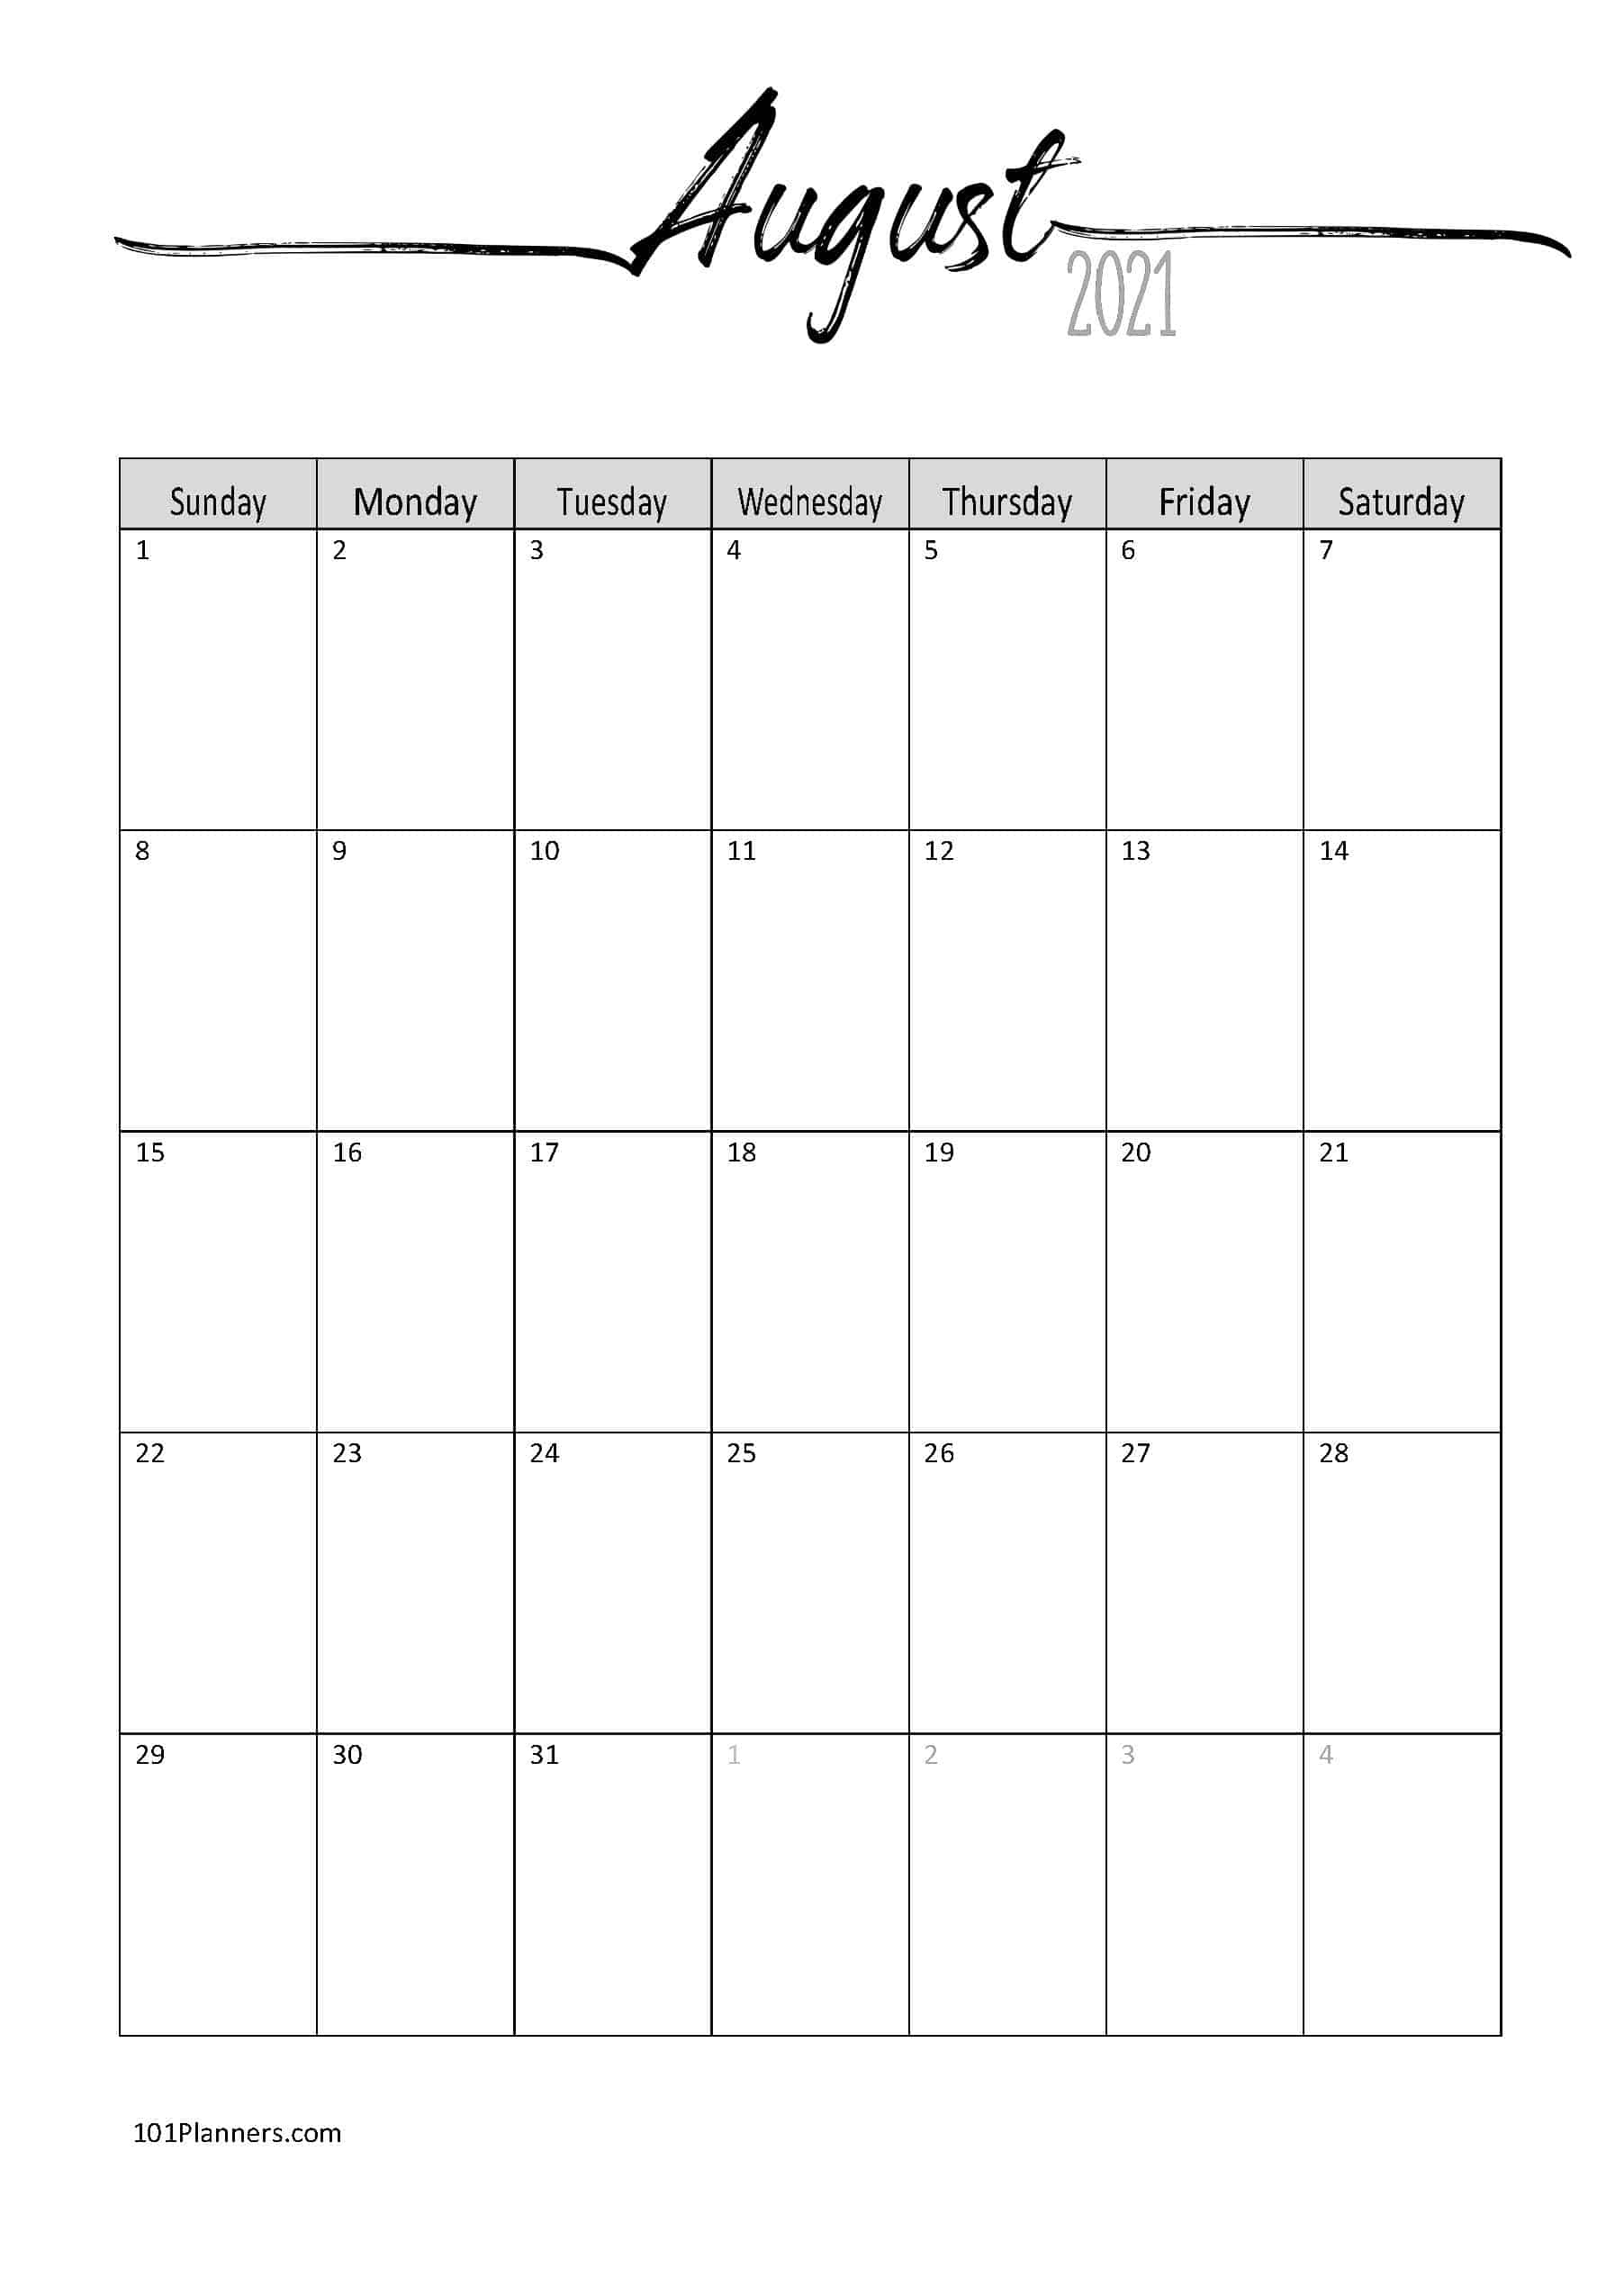 2021 Monthly Calendar Printable Word / Weekly Calendars How To Get A 6 Month Calendar Wod